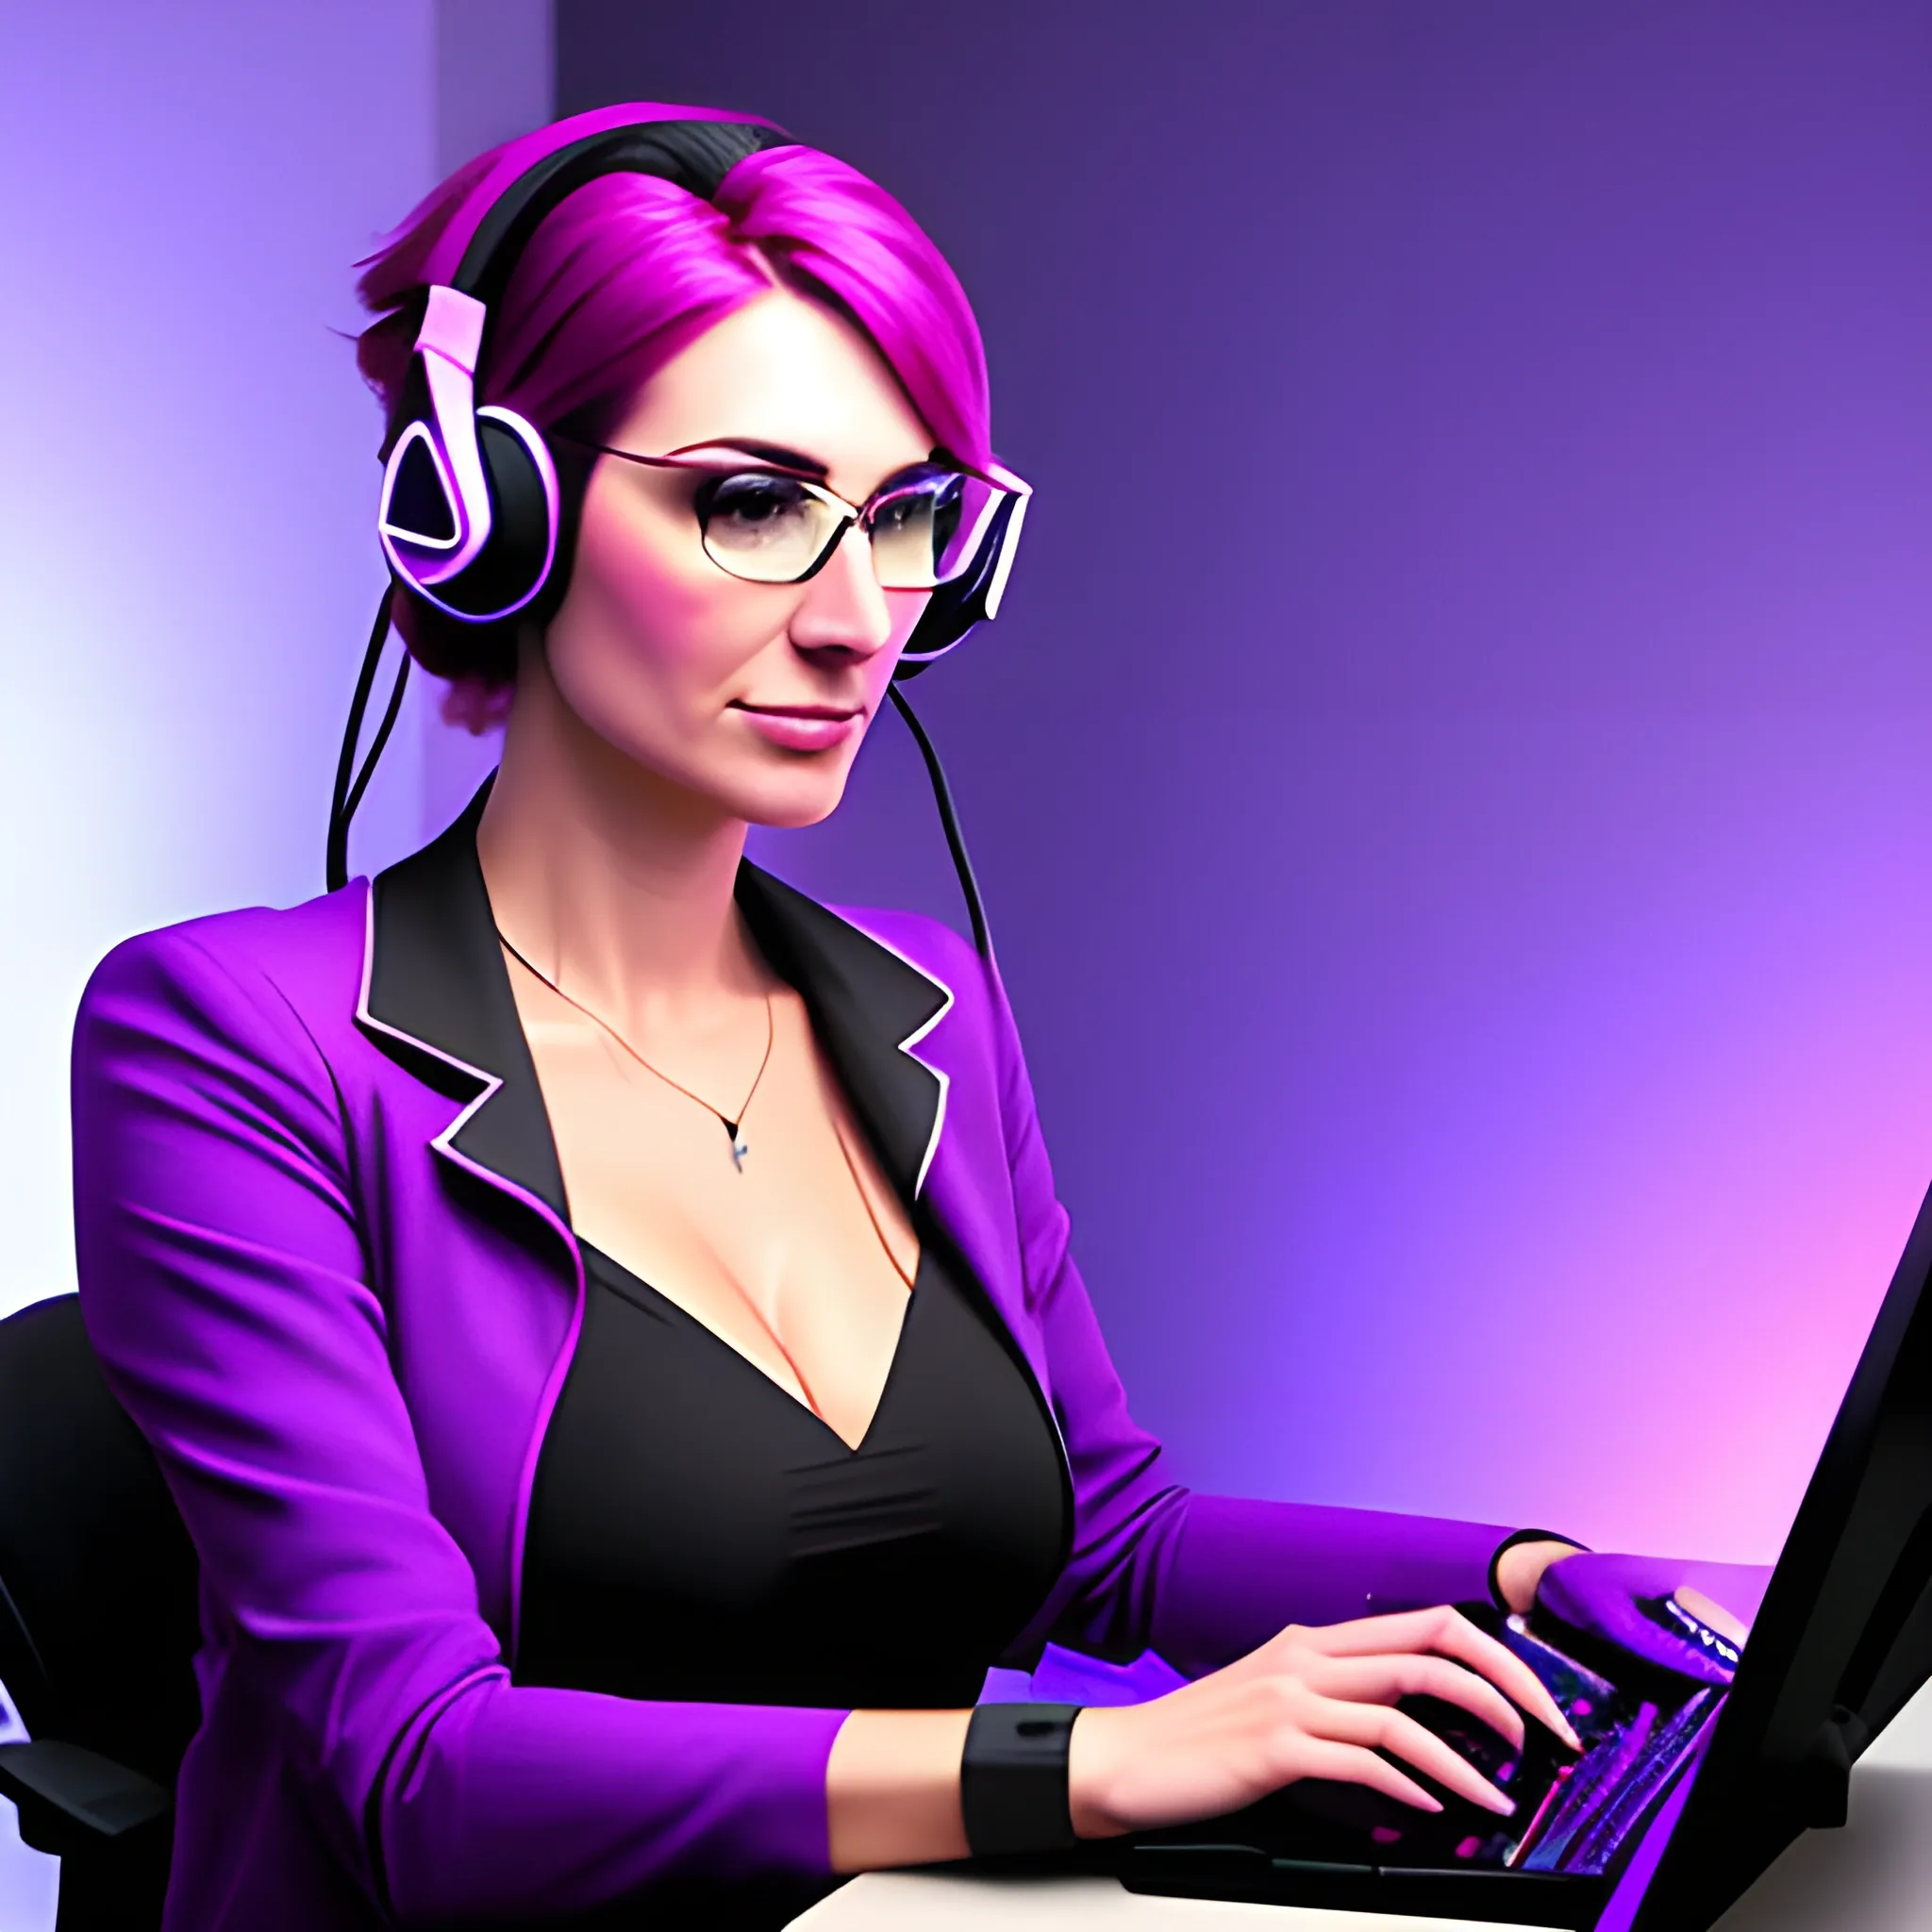 girl playing game at computer with headset and purple lights